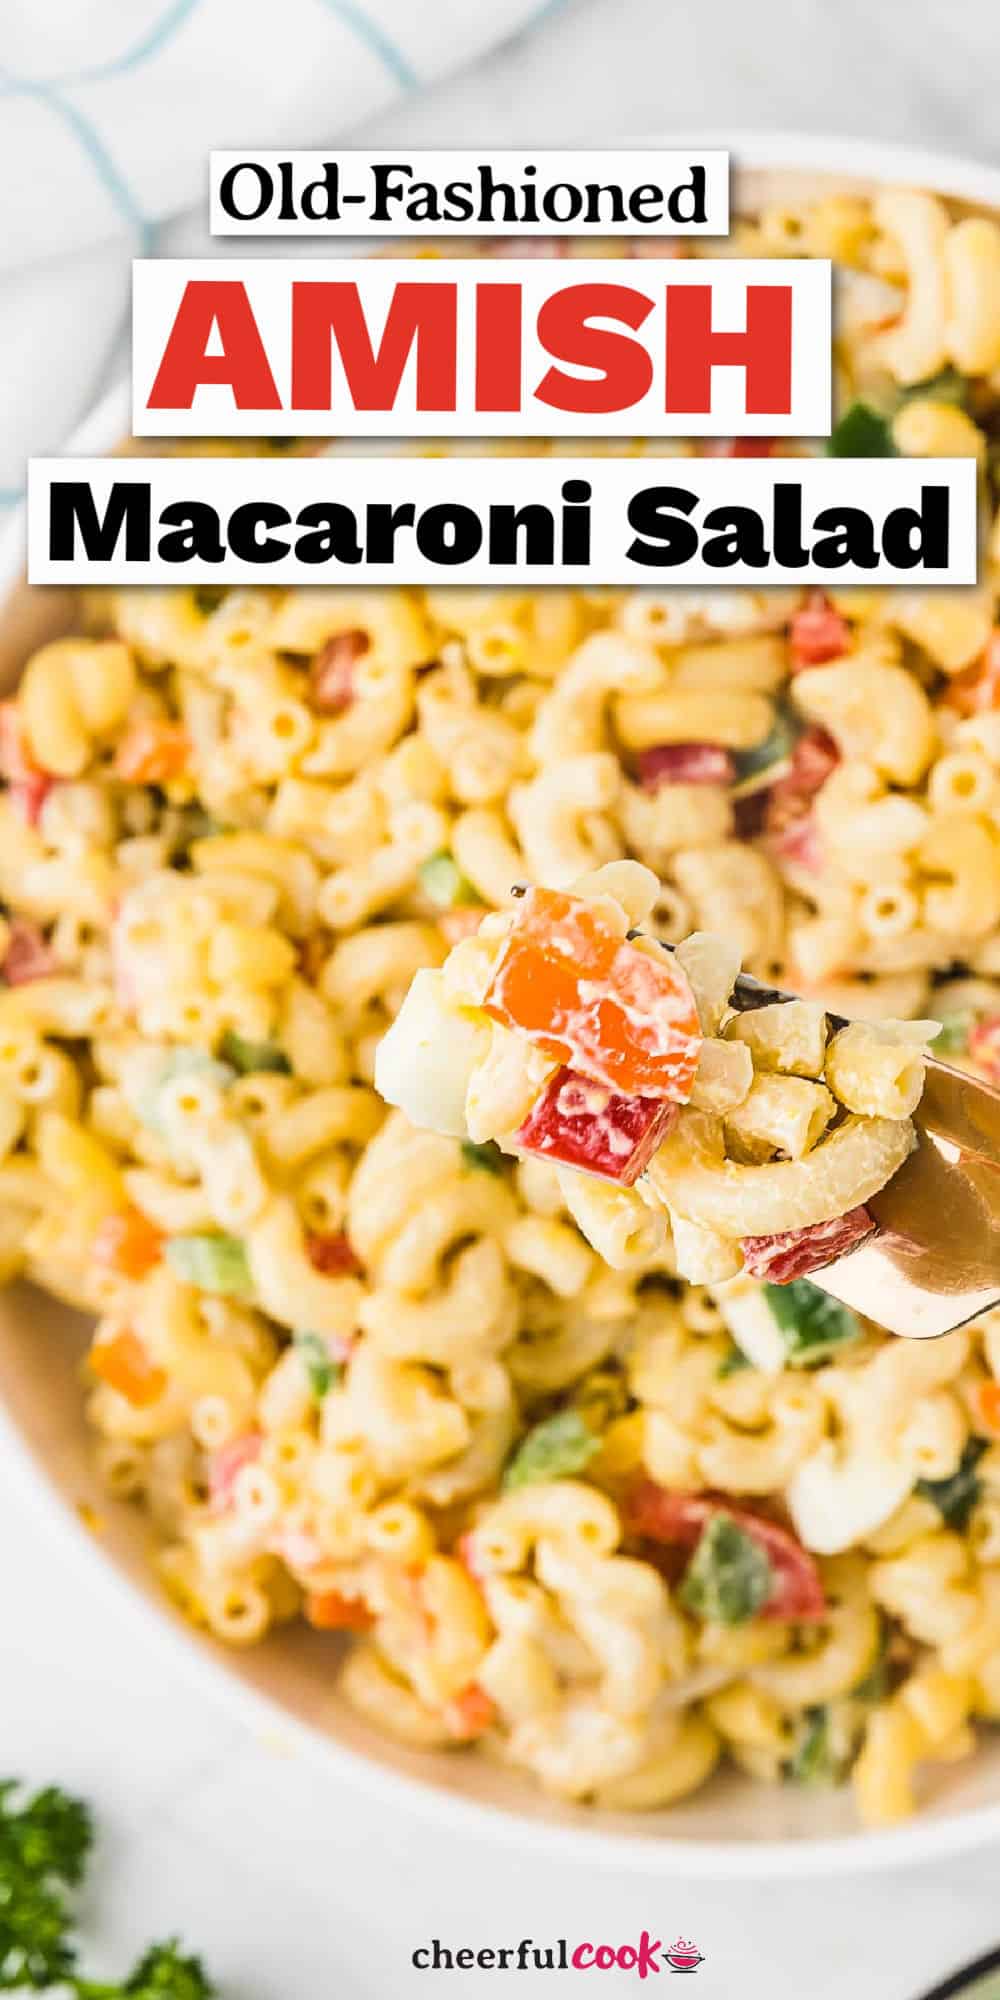 This simple, sweet and tangy Amish Macaroni Salad is a real crowd pleaser. Perfect for parties and potlucks. #cheerfulcook #macaronisalad #sweet #easy #potluck #salad #amishfood via @cheerfulcook